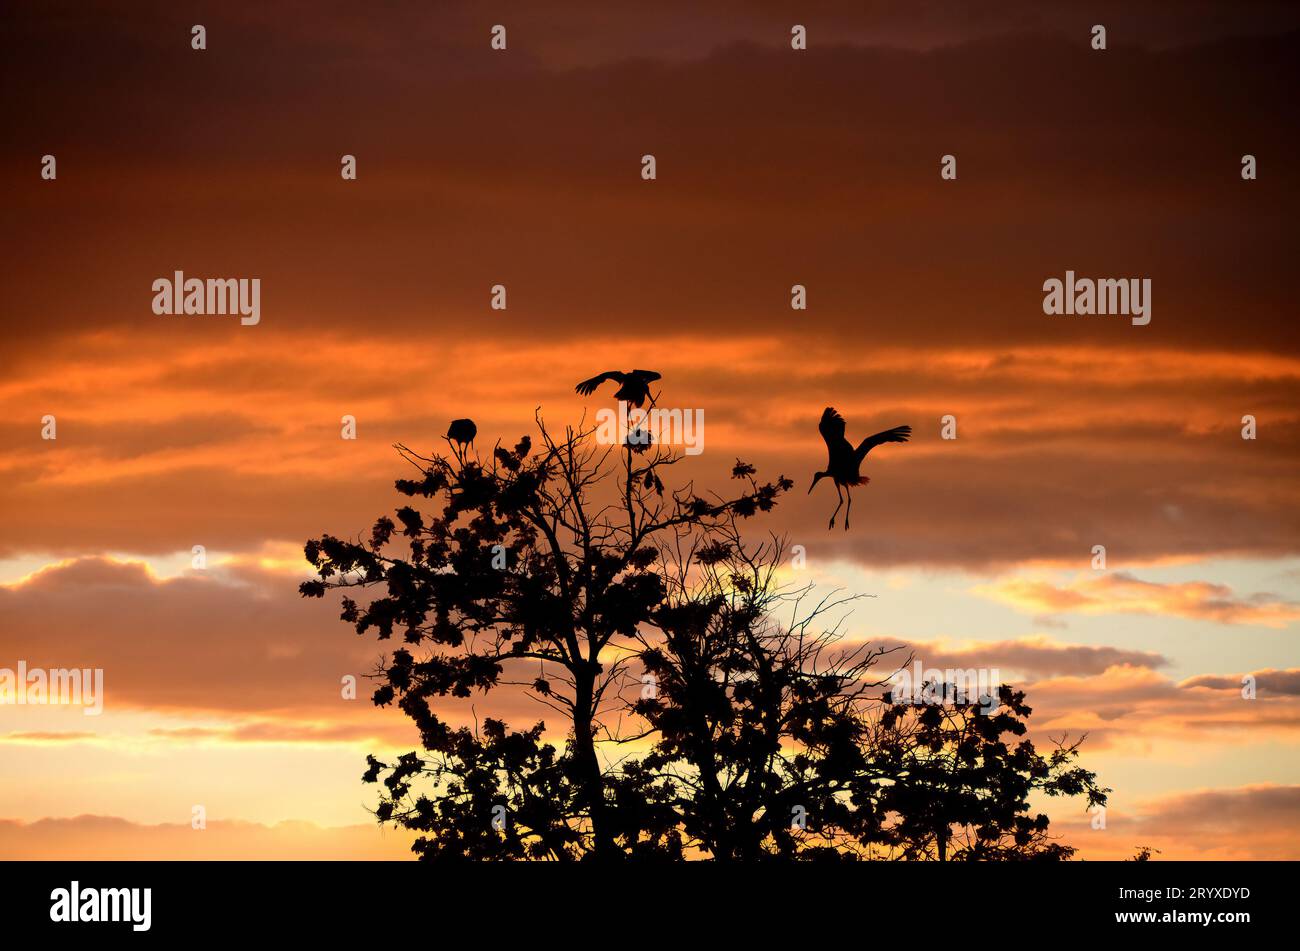 Storks landing on a tree at sunset Stock Photo